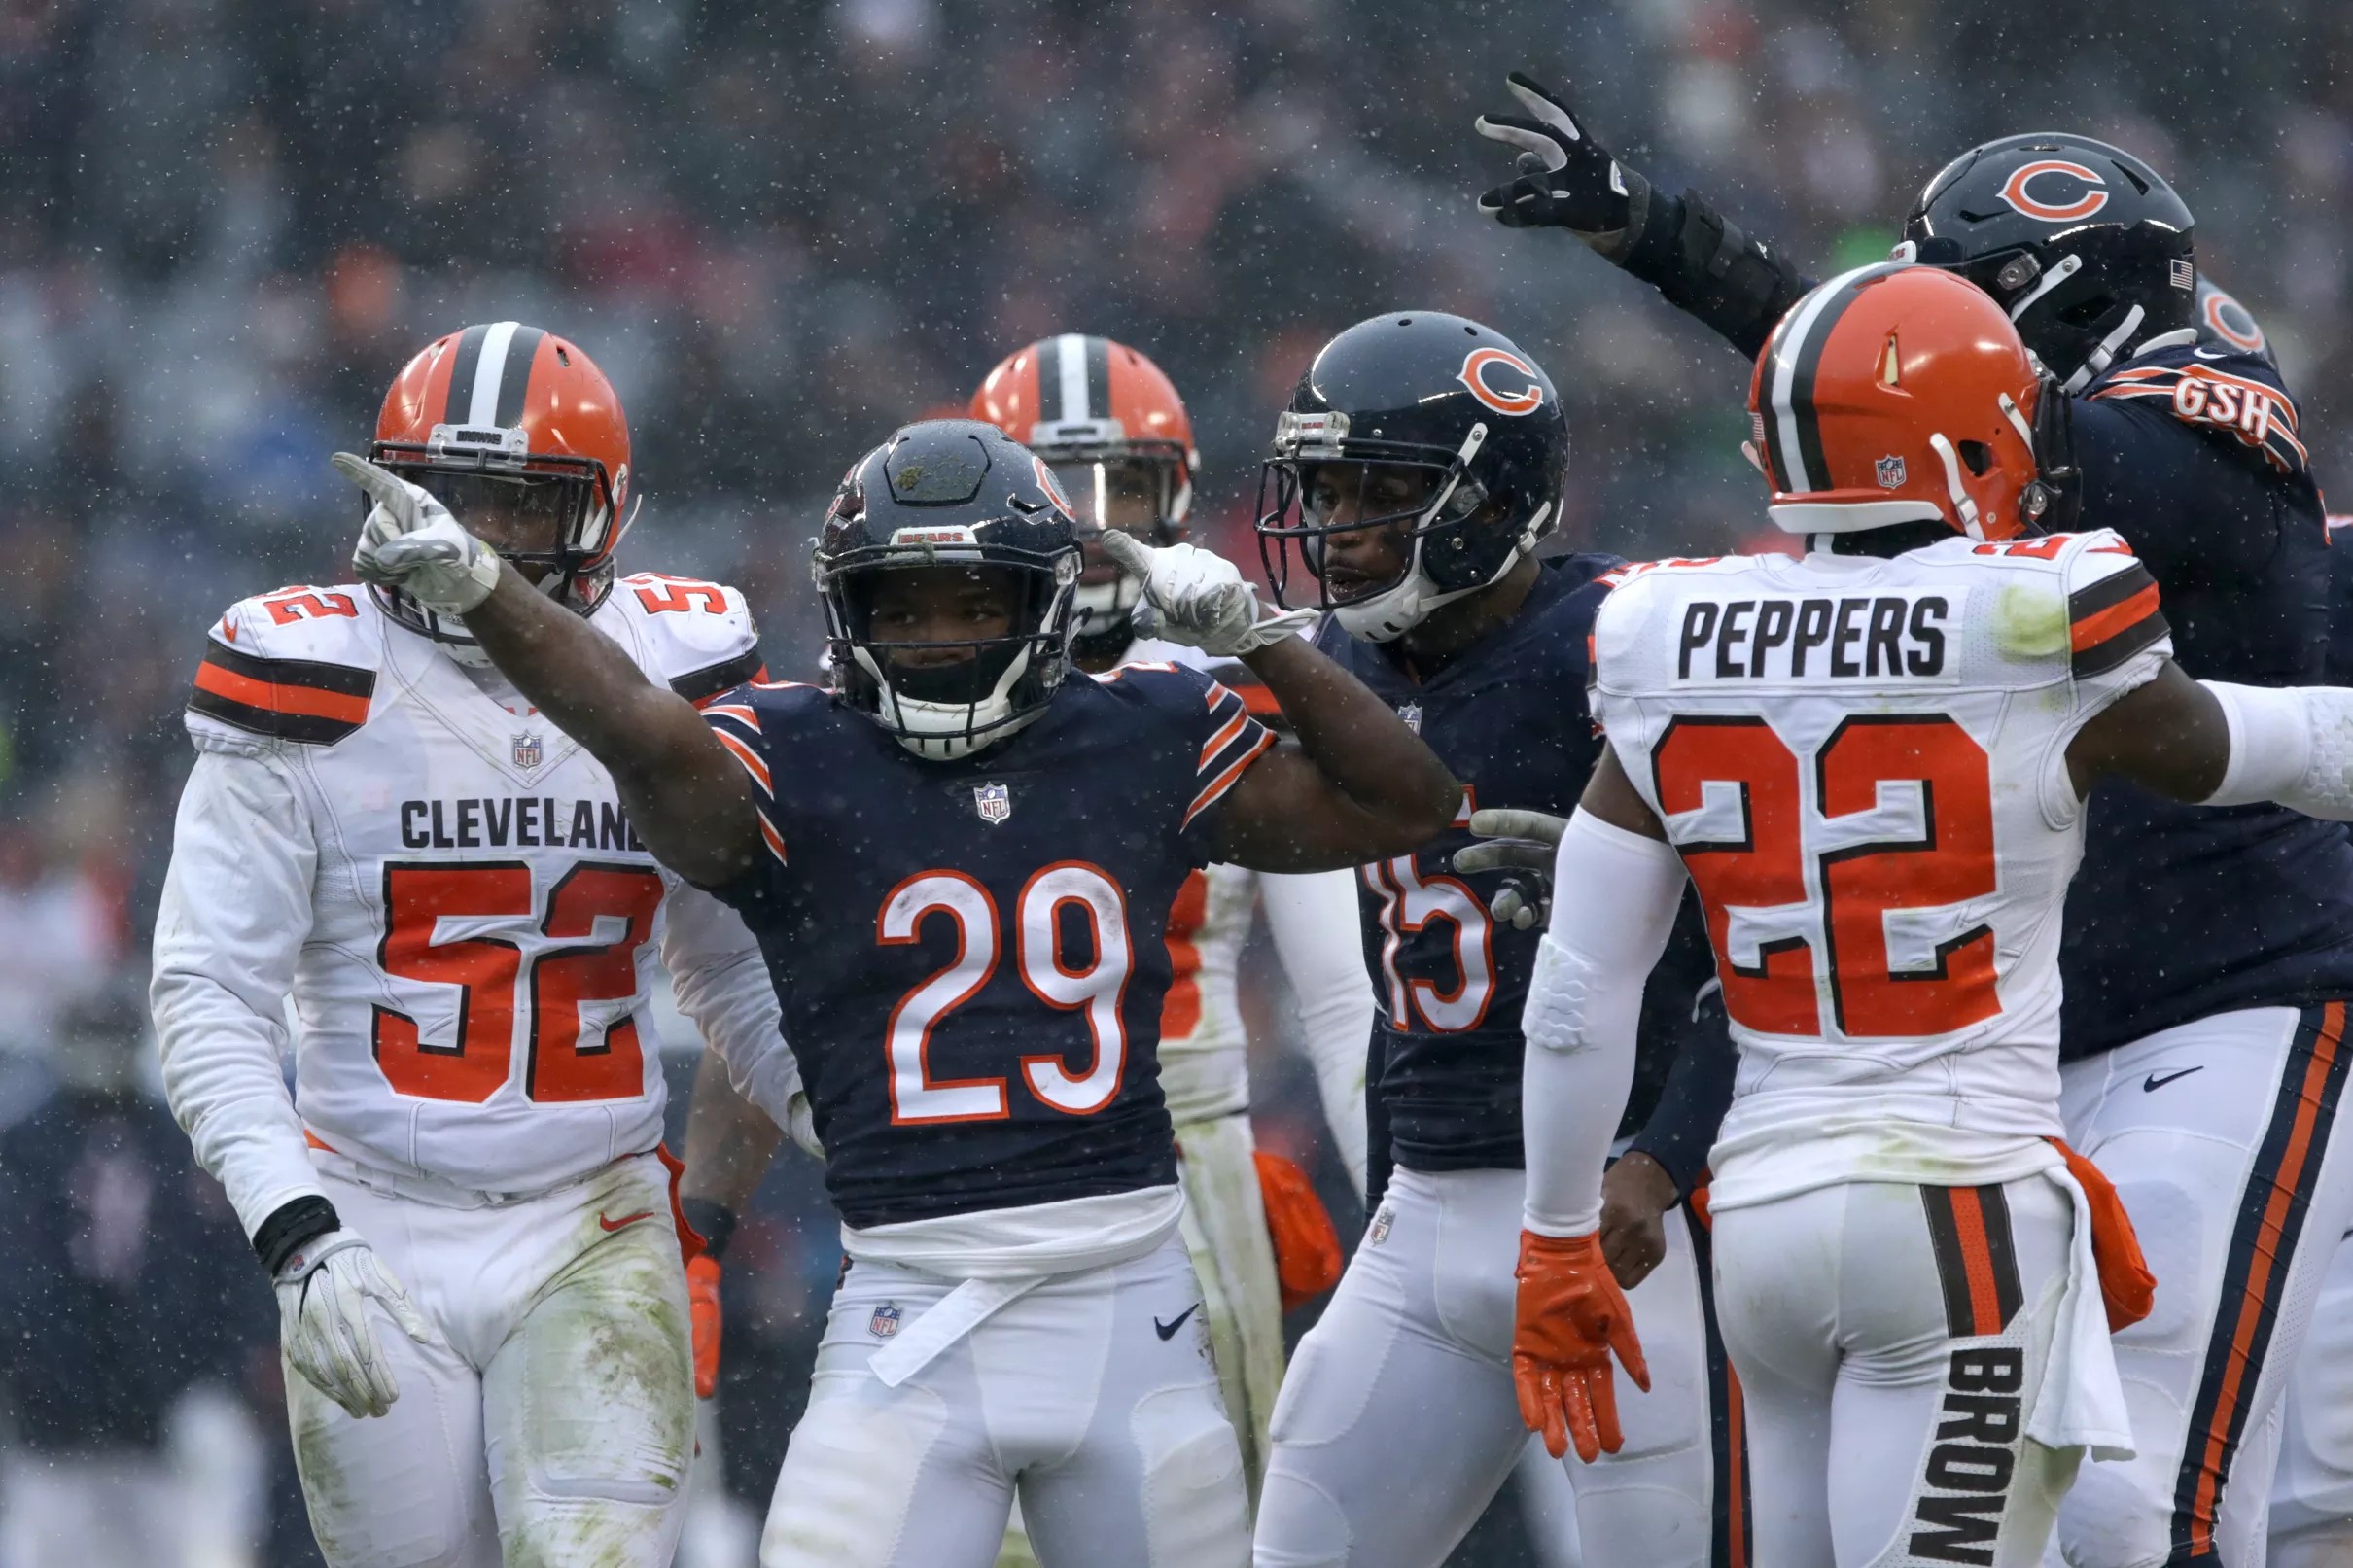 Snap counts, stats and more Chicago Bears vs Cleveland Browns